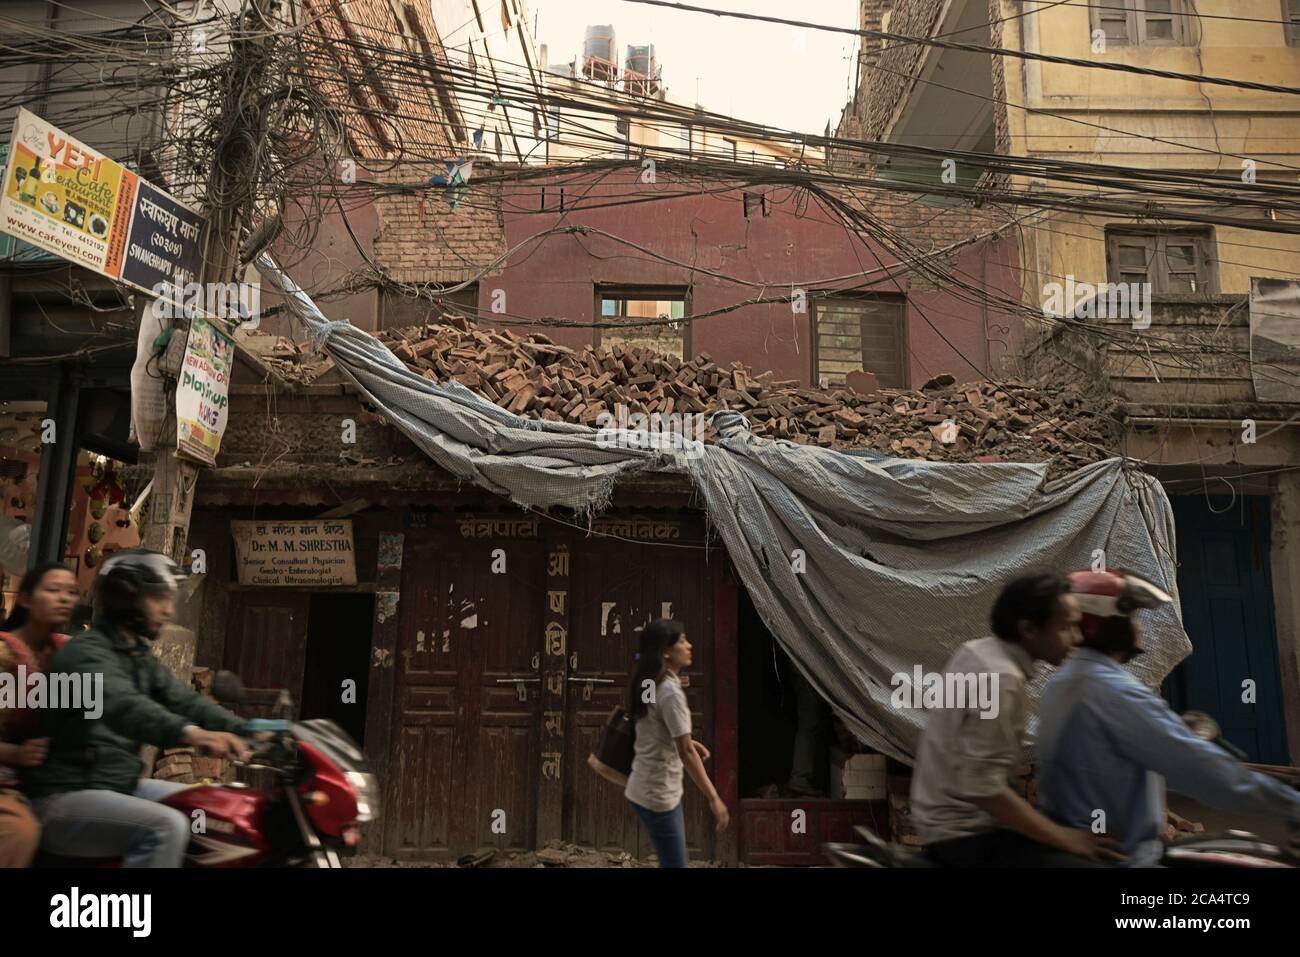 Pedestrians walking on a street in Thamel, Kathmandu, with a damaged building in the background. Stock Photo